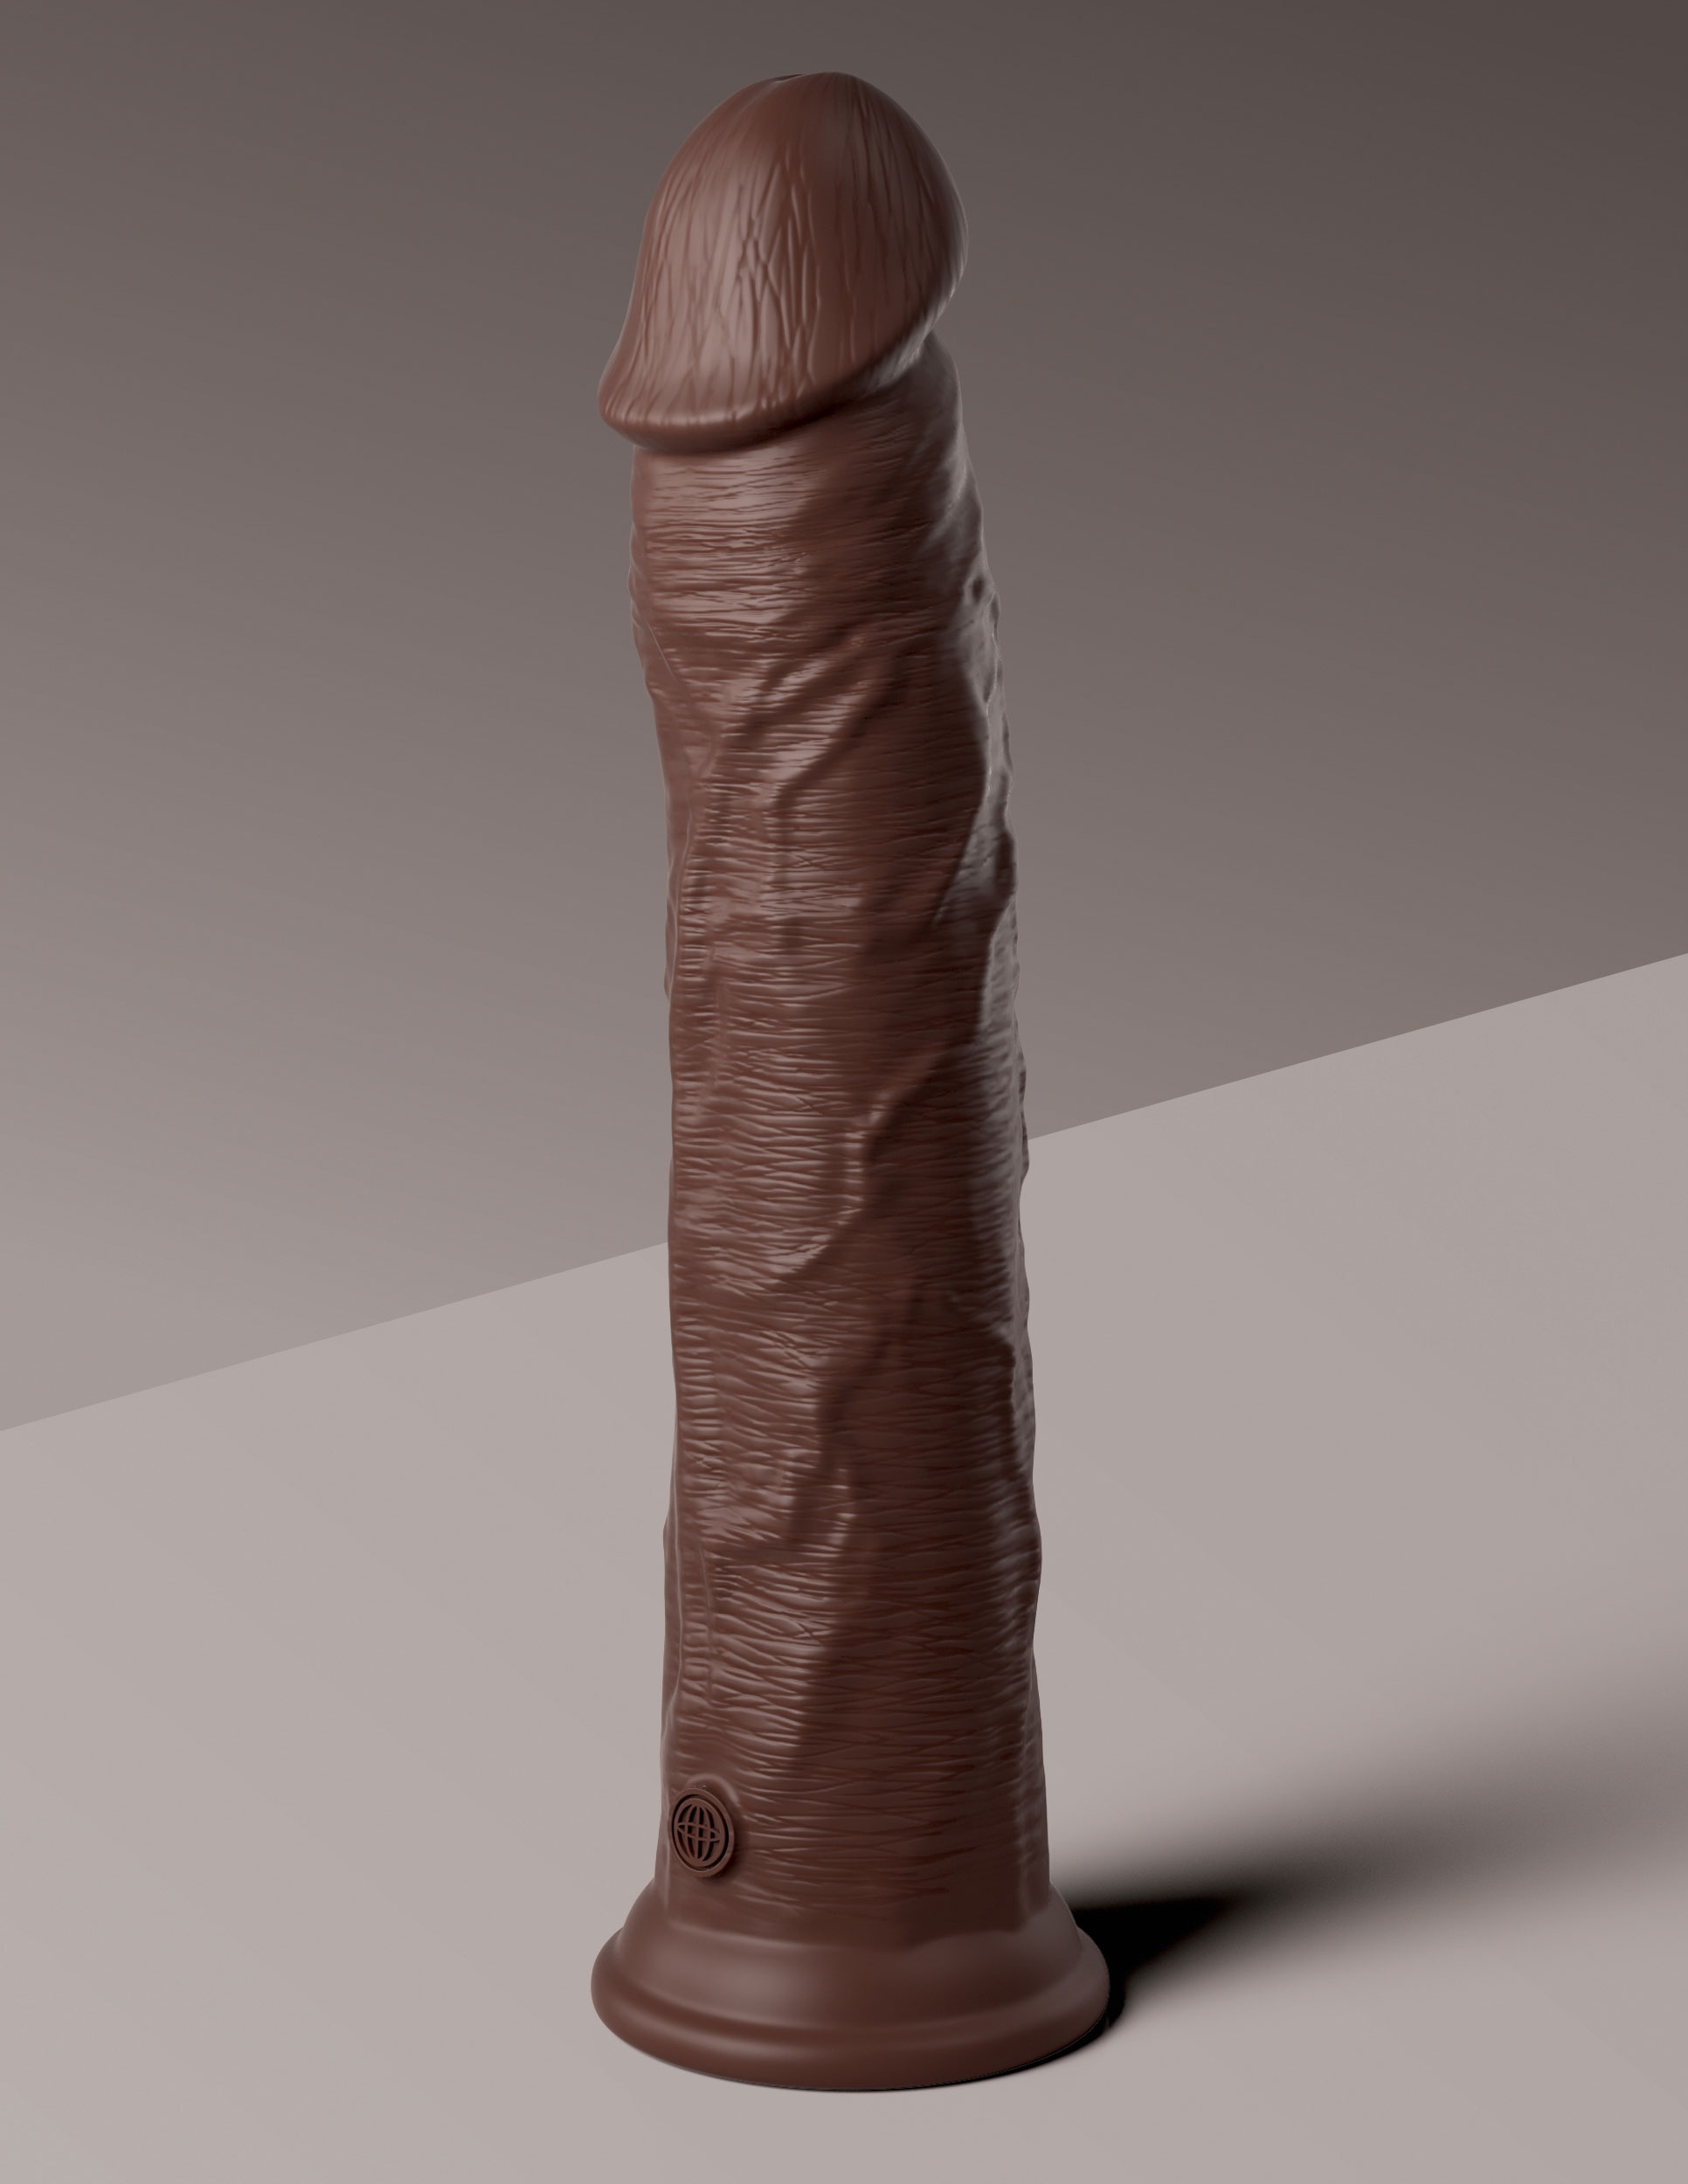 king cock elite  inch silicone dual density cock brown 